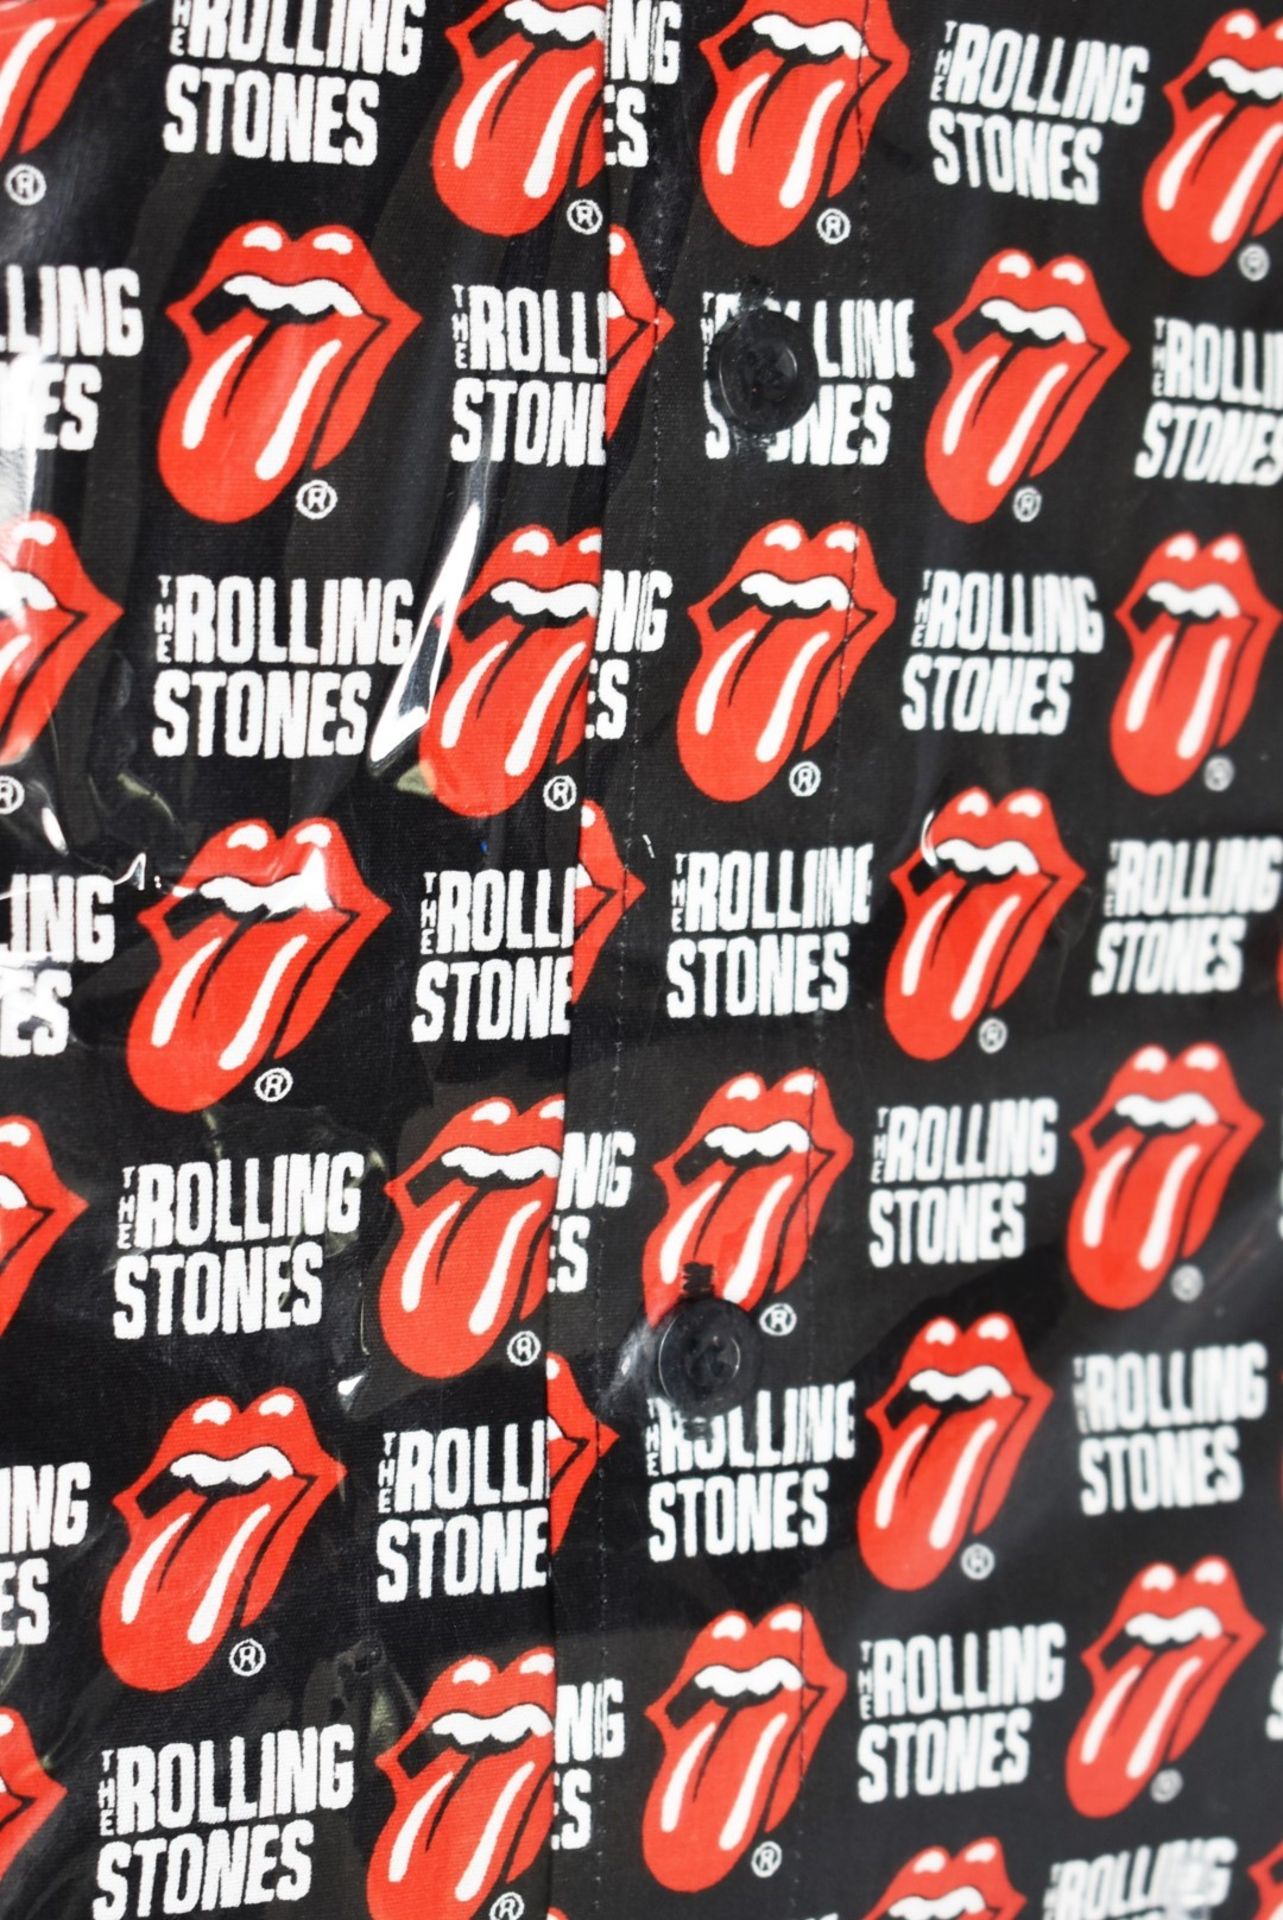 1 x Rolling Stones Talk and Text Casual Button Shirt - Size: Large - Officially Licensed Merchandise - Image 5 of 12